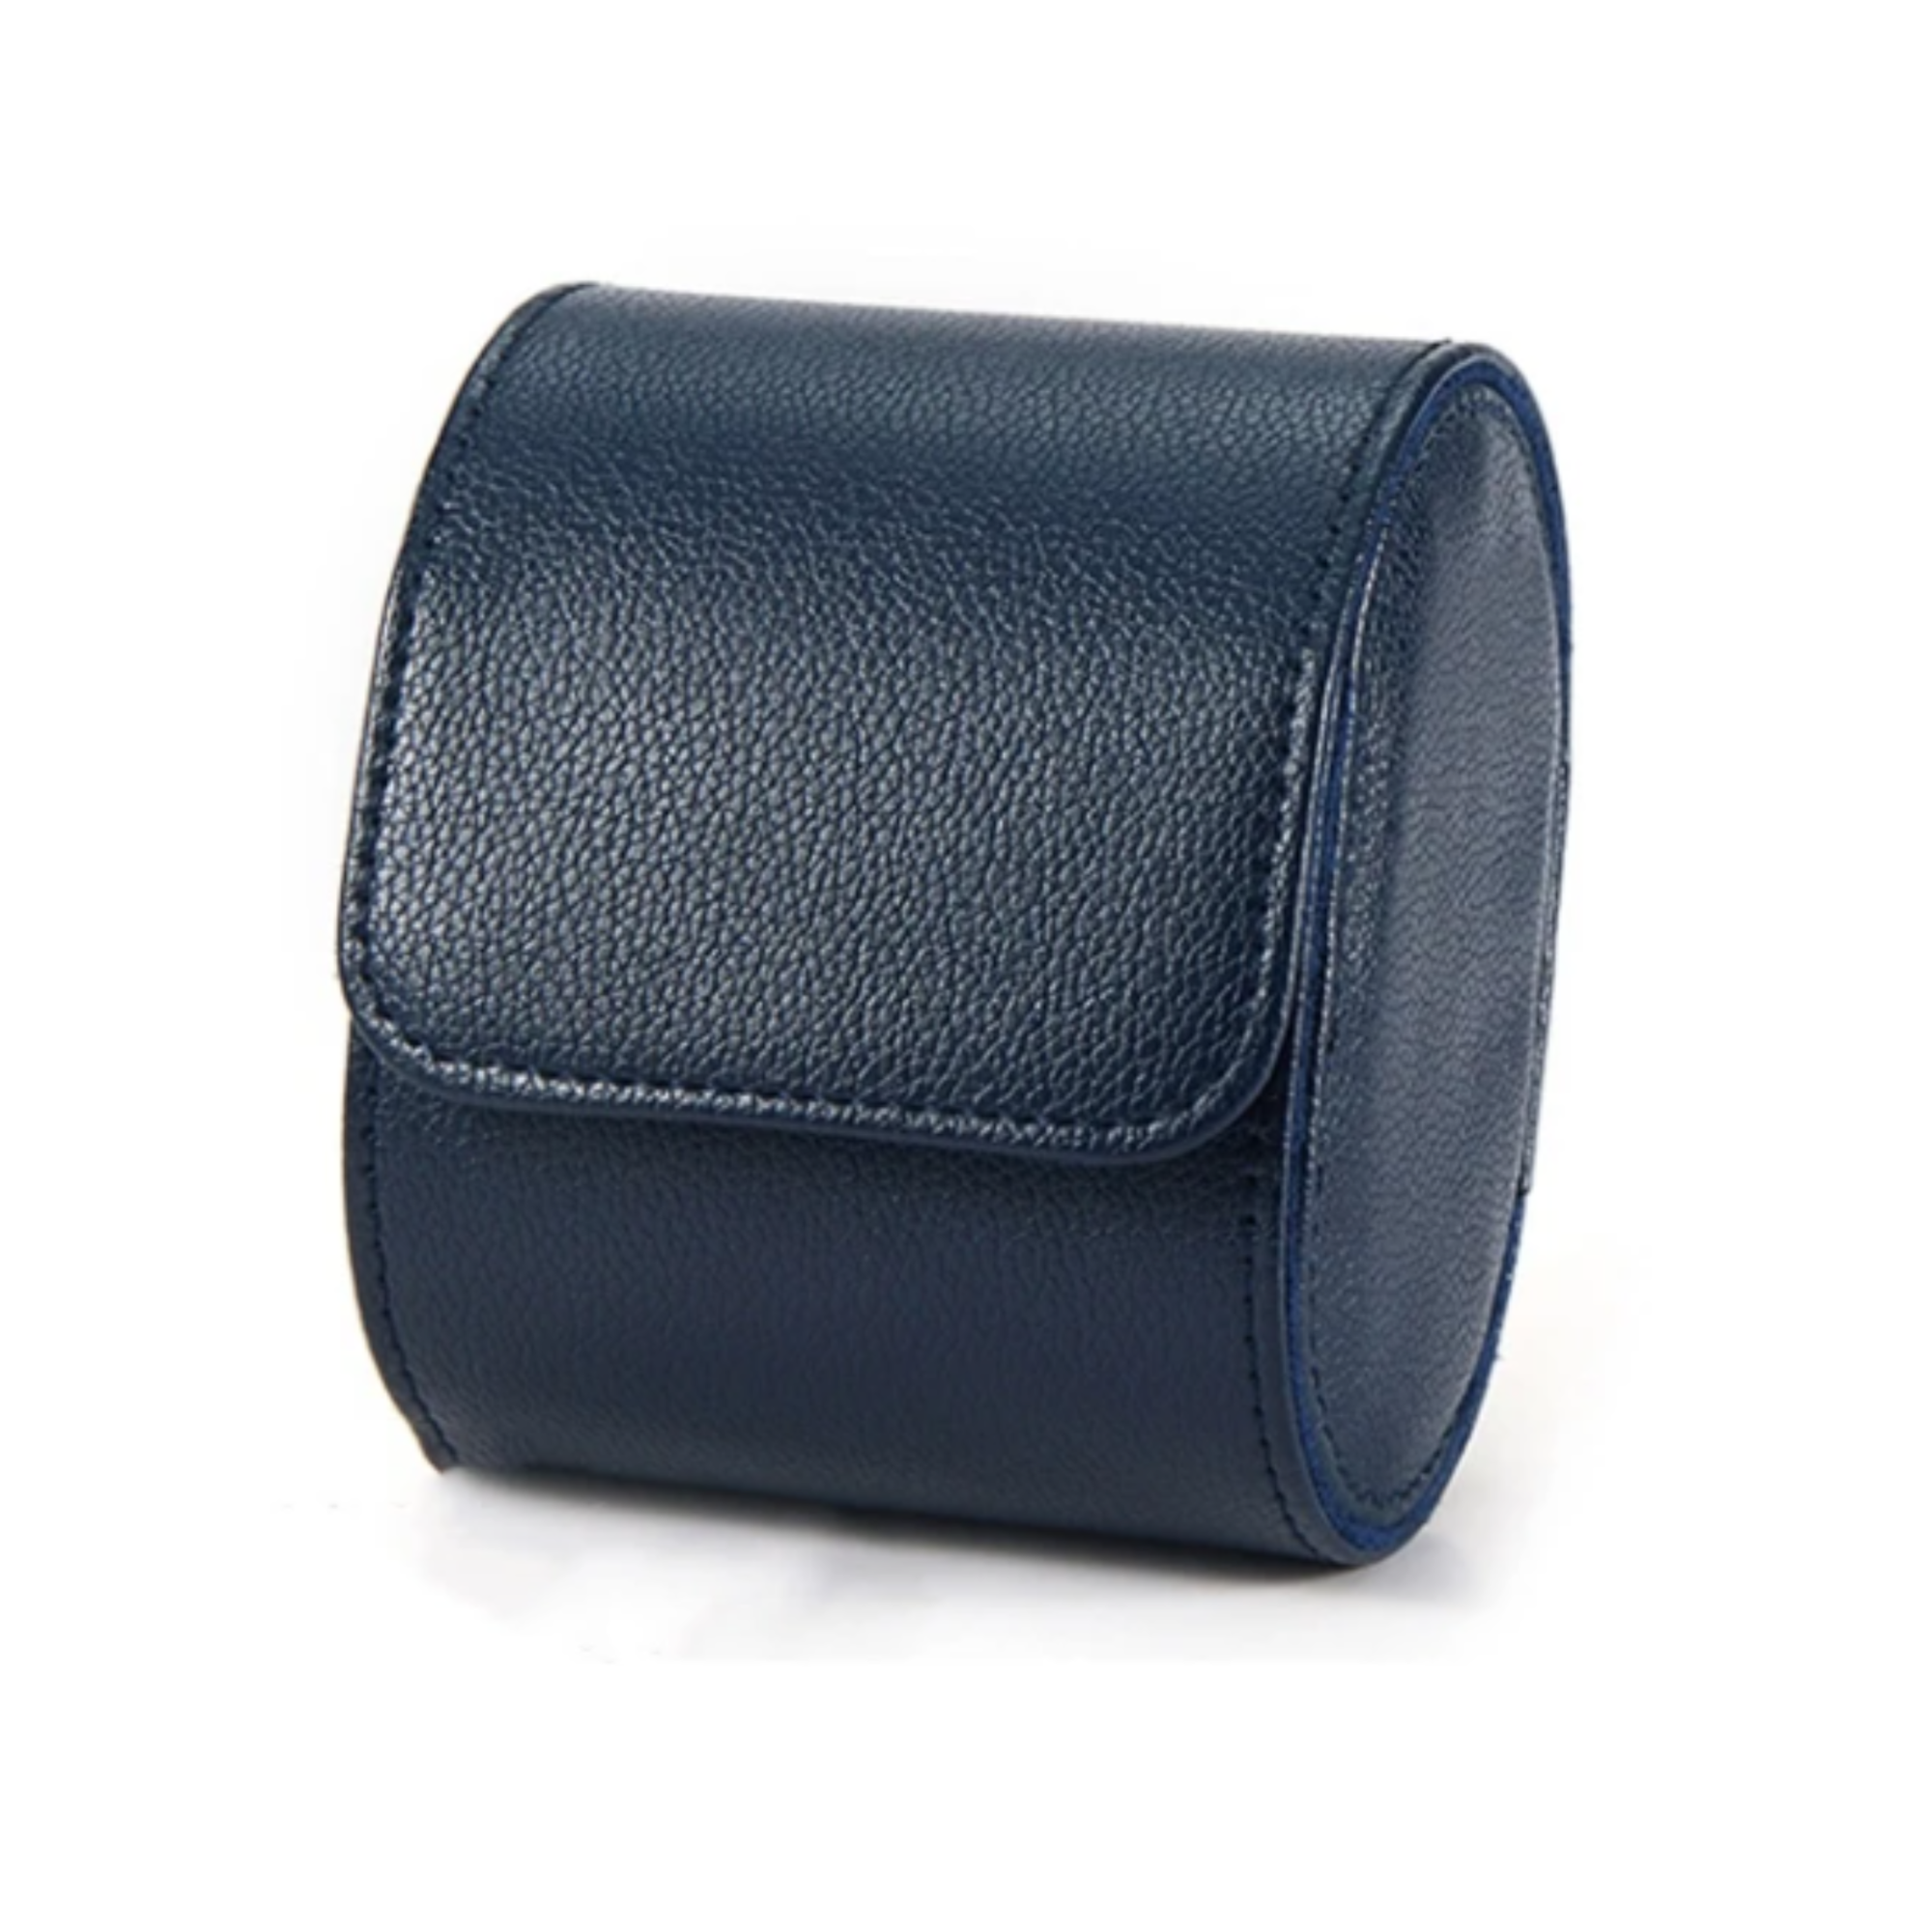 Dream Watches  Minuscle Premium Watch Storage and Travel Case : Single Slot  |  Navy-Blue Leather